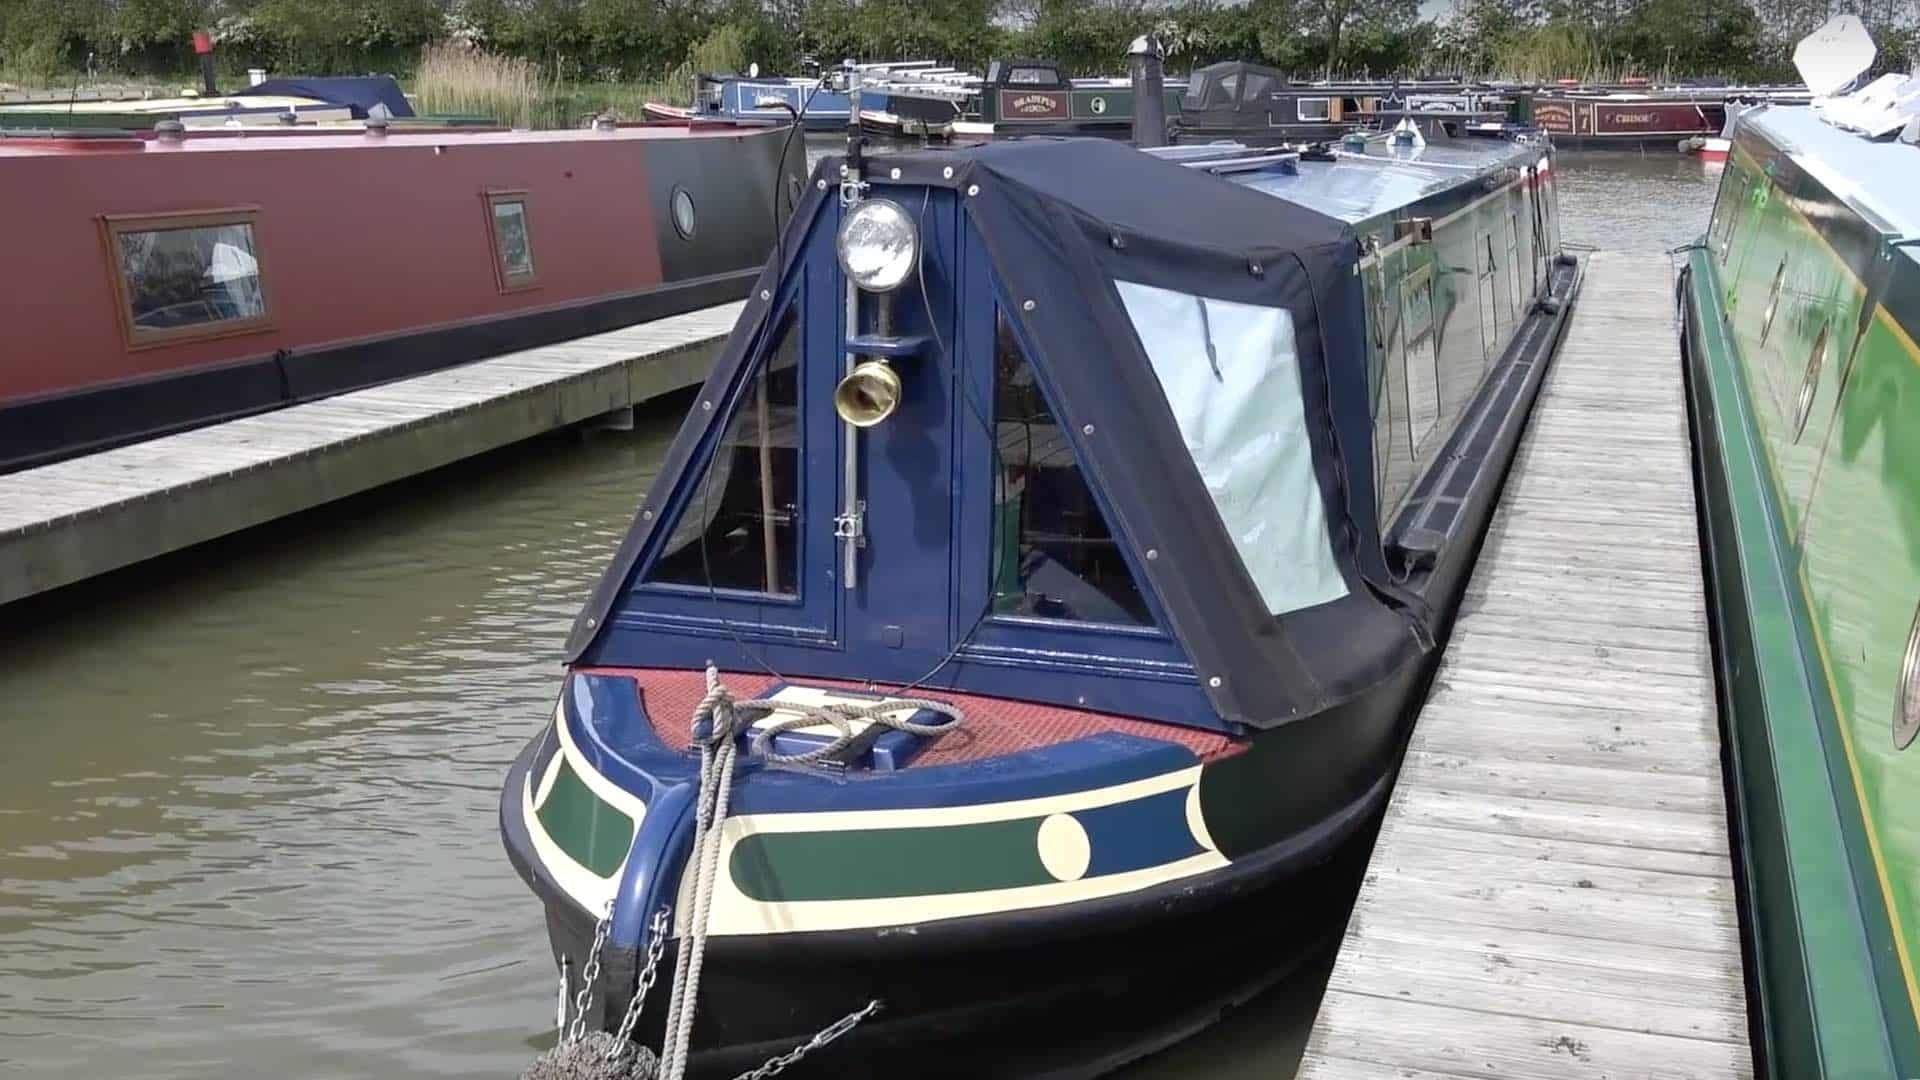 Reporter moved to a narrowboat